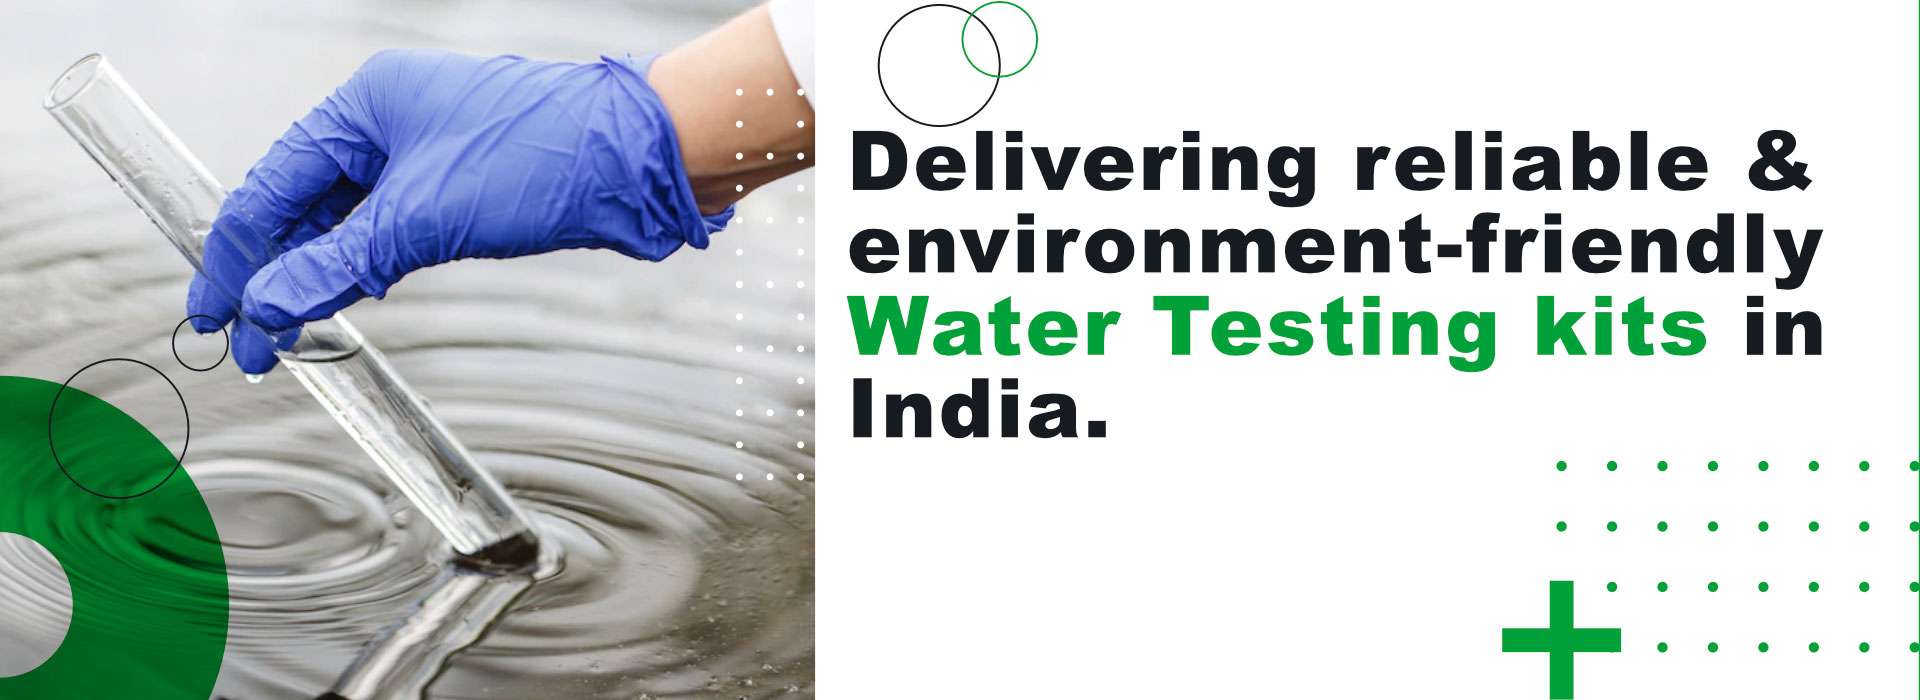  Delivering reliable & environment-friendly water Testing kits in India Manufacturers in Karnataka